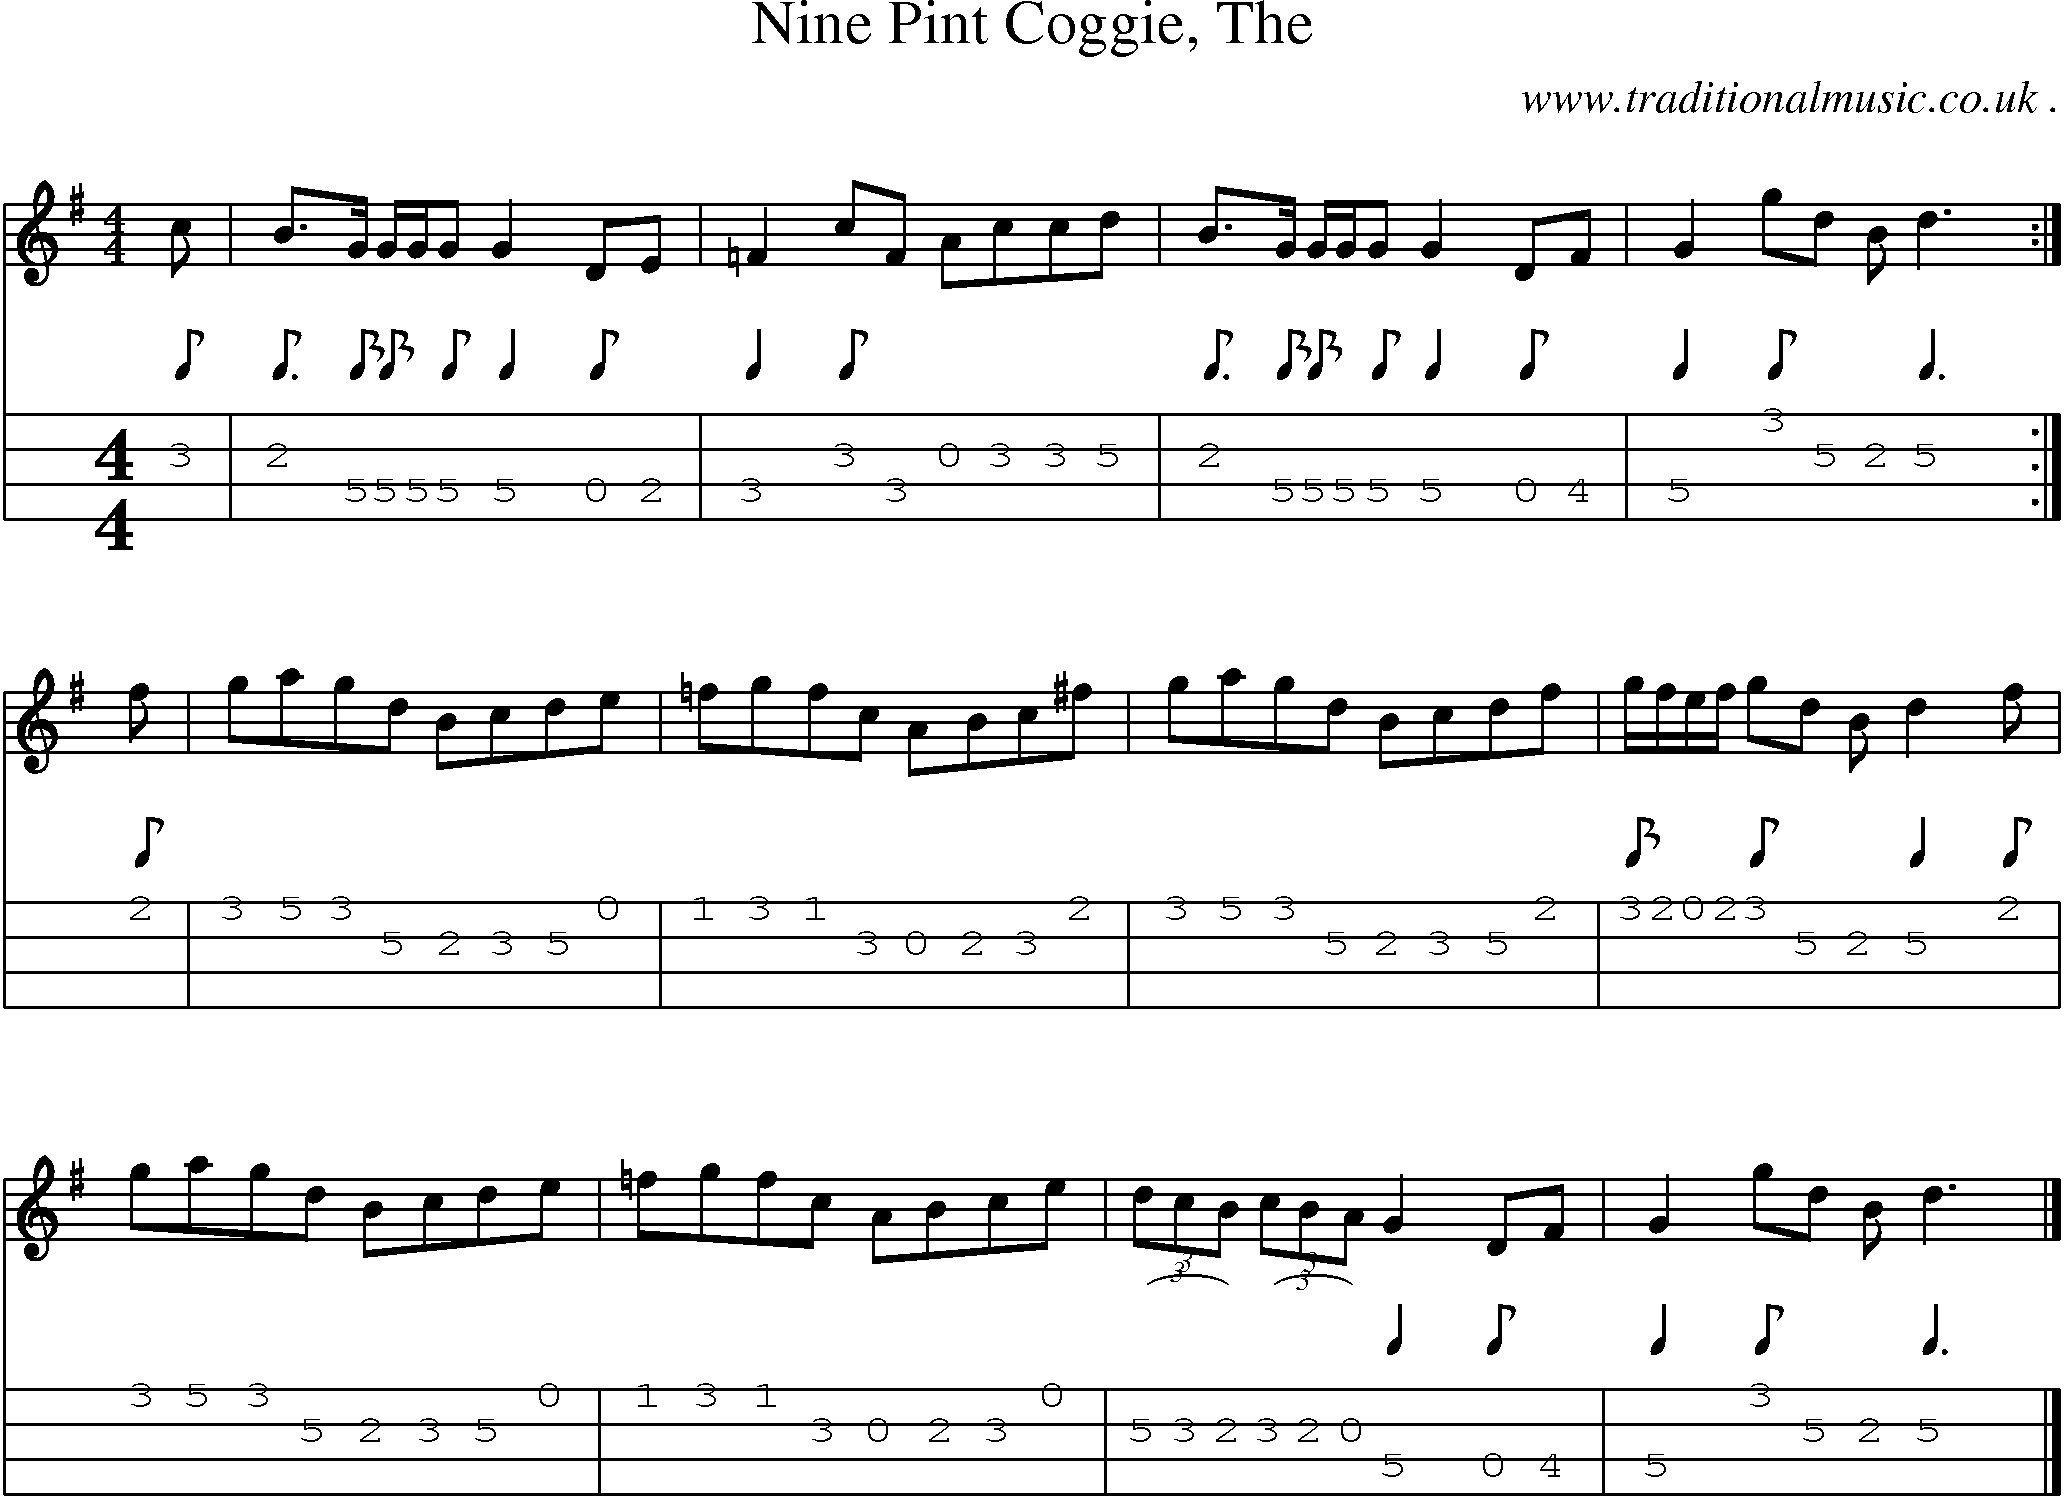 Sheet-music  score, Chords and Mandolin Tabs for Nine Pint Coggie The